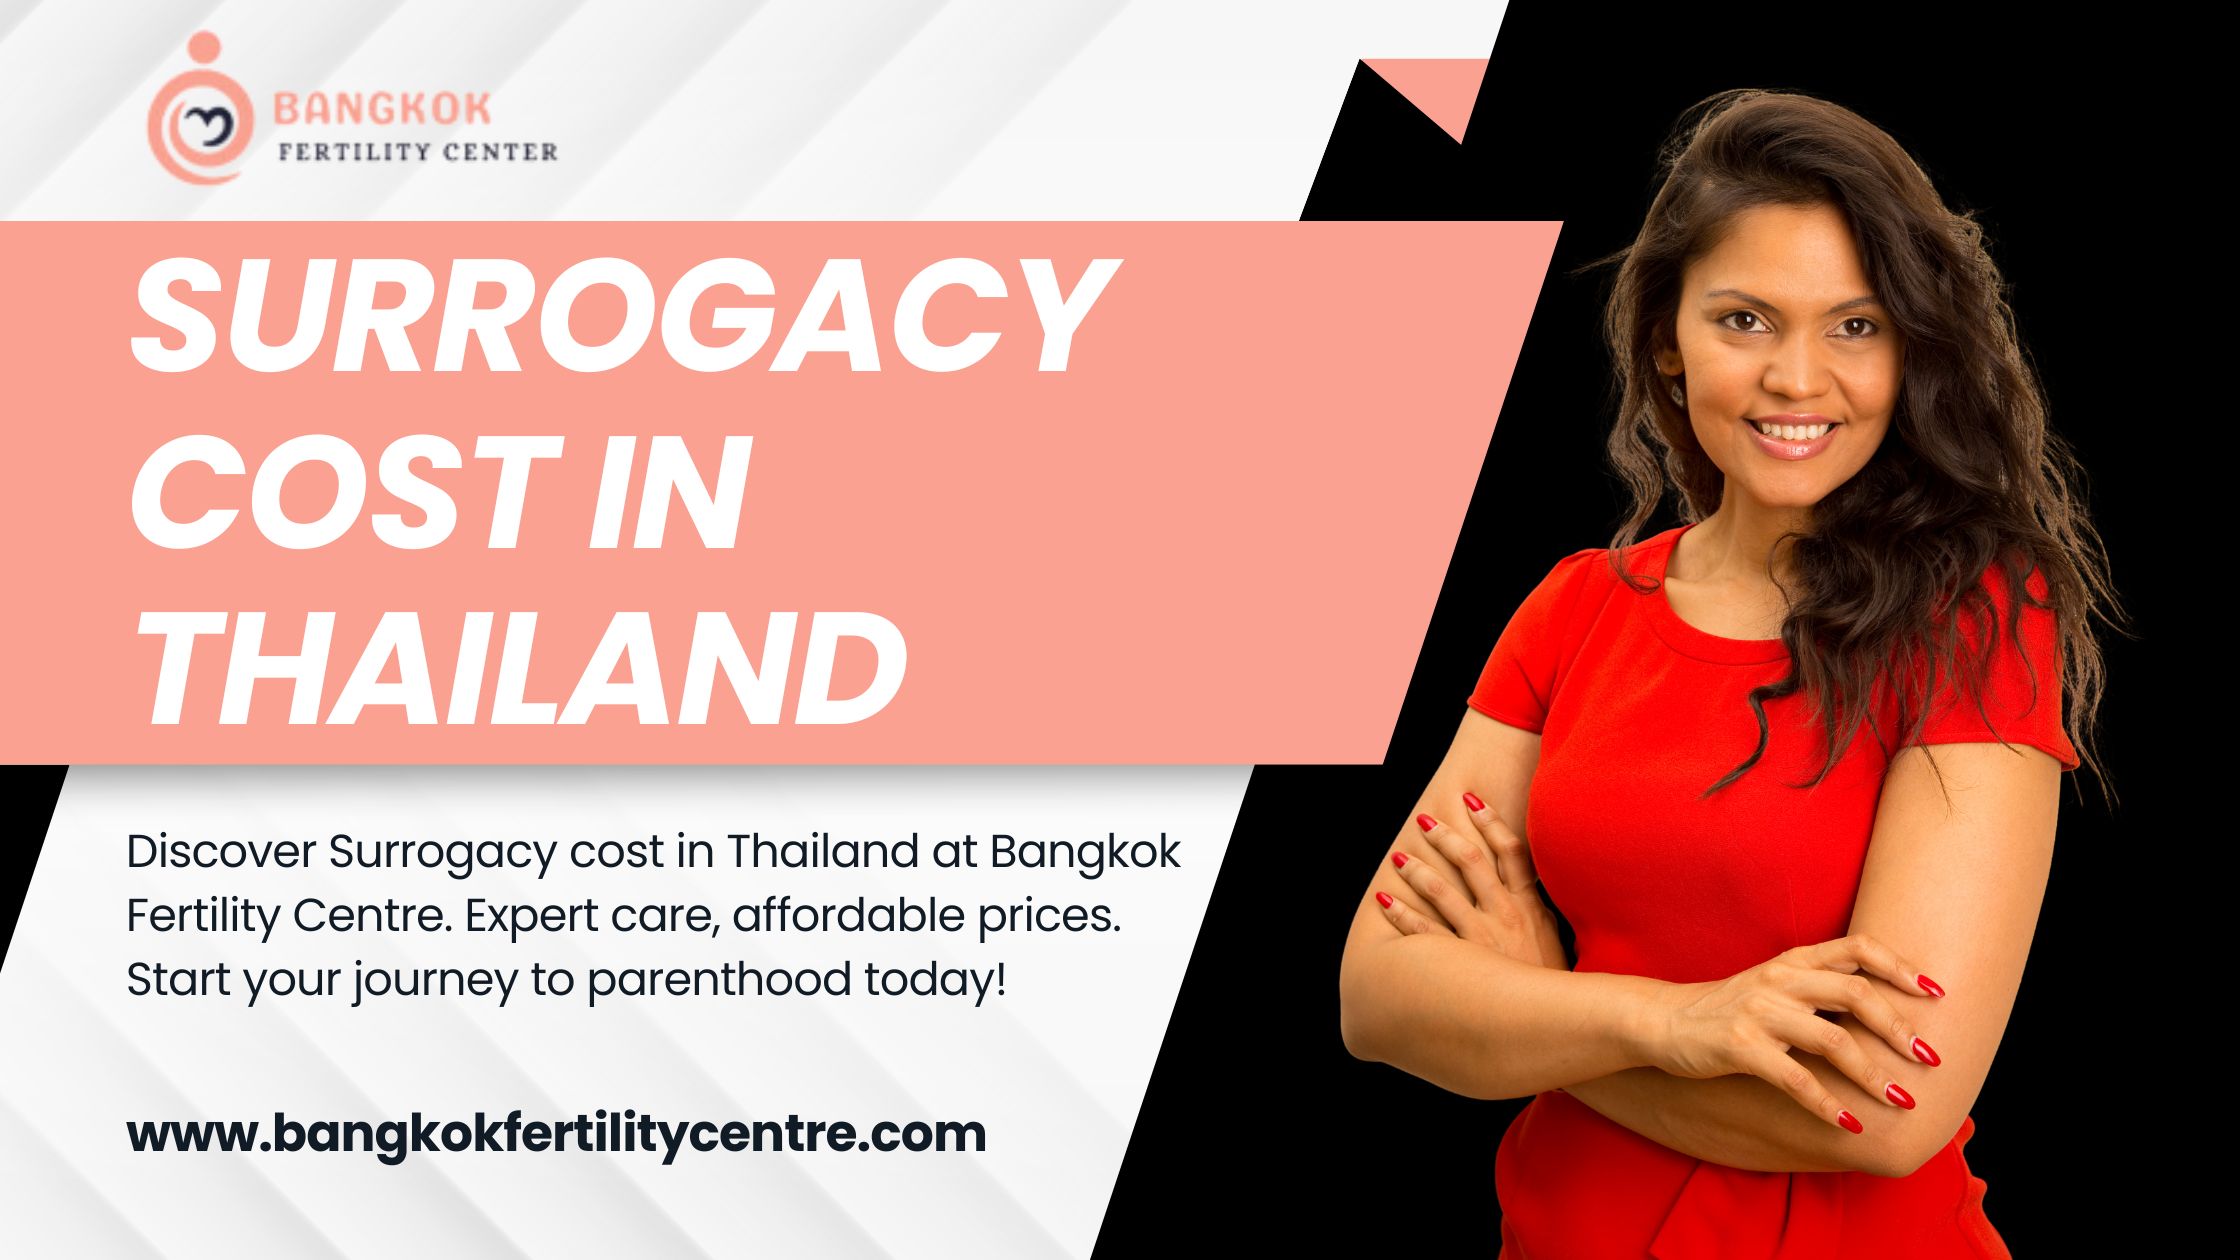 Surrogacy cost in Thailand